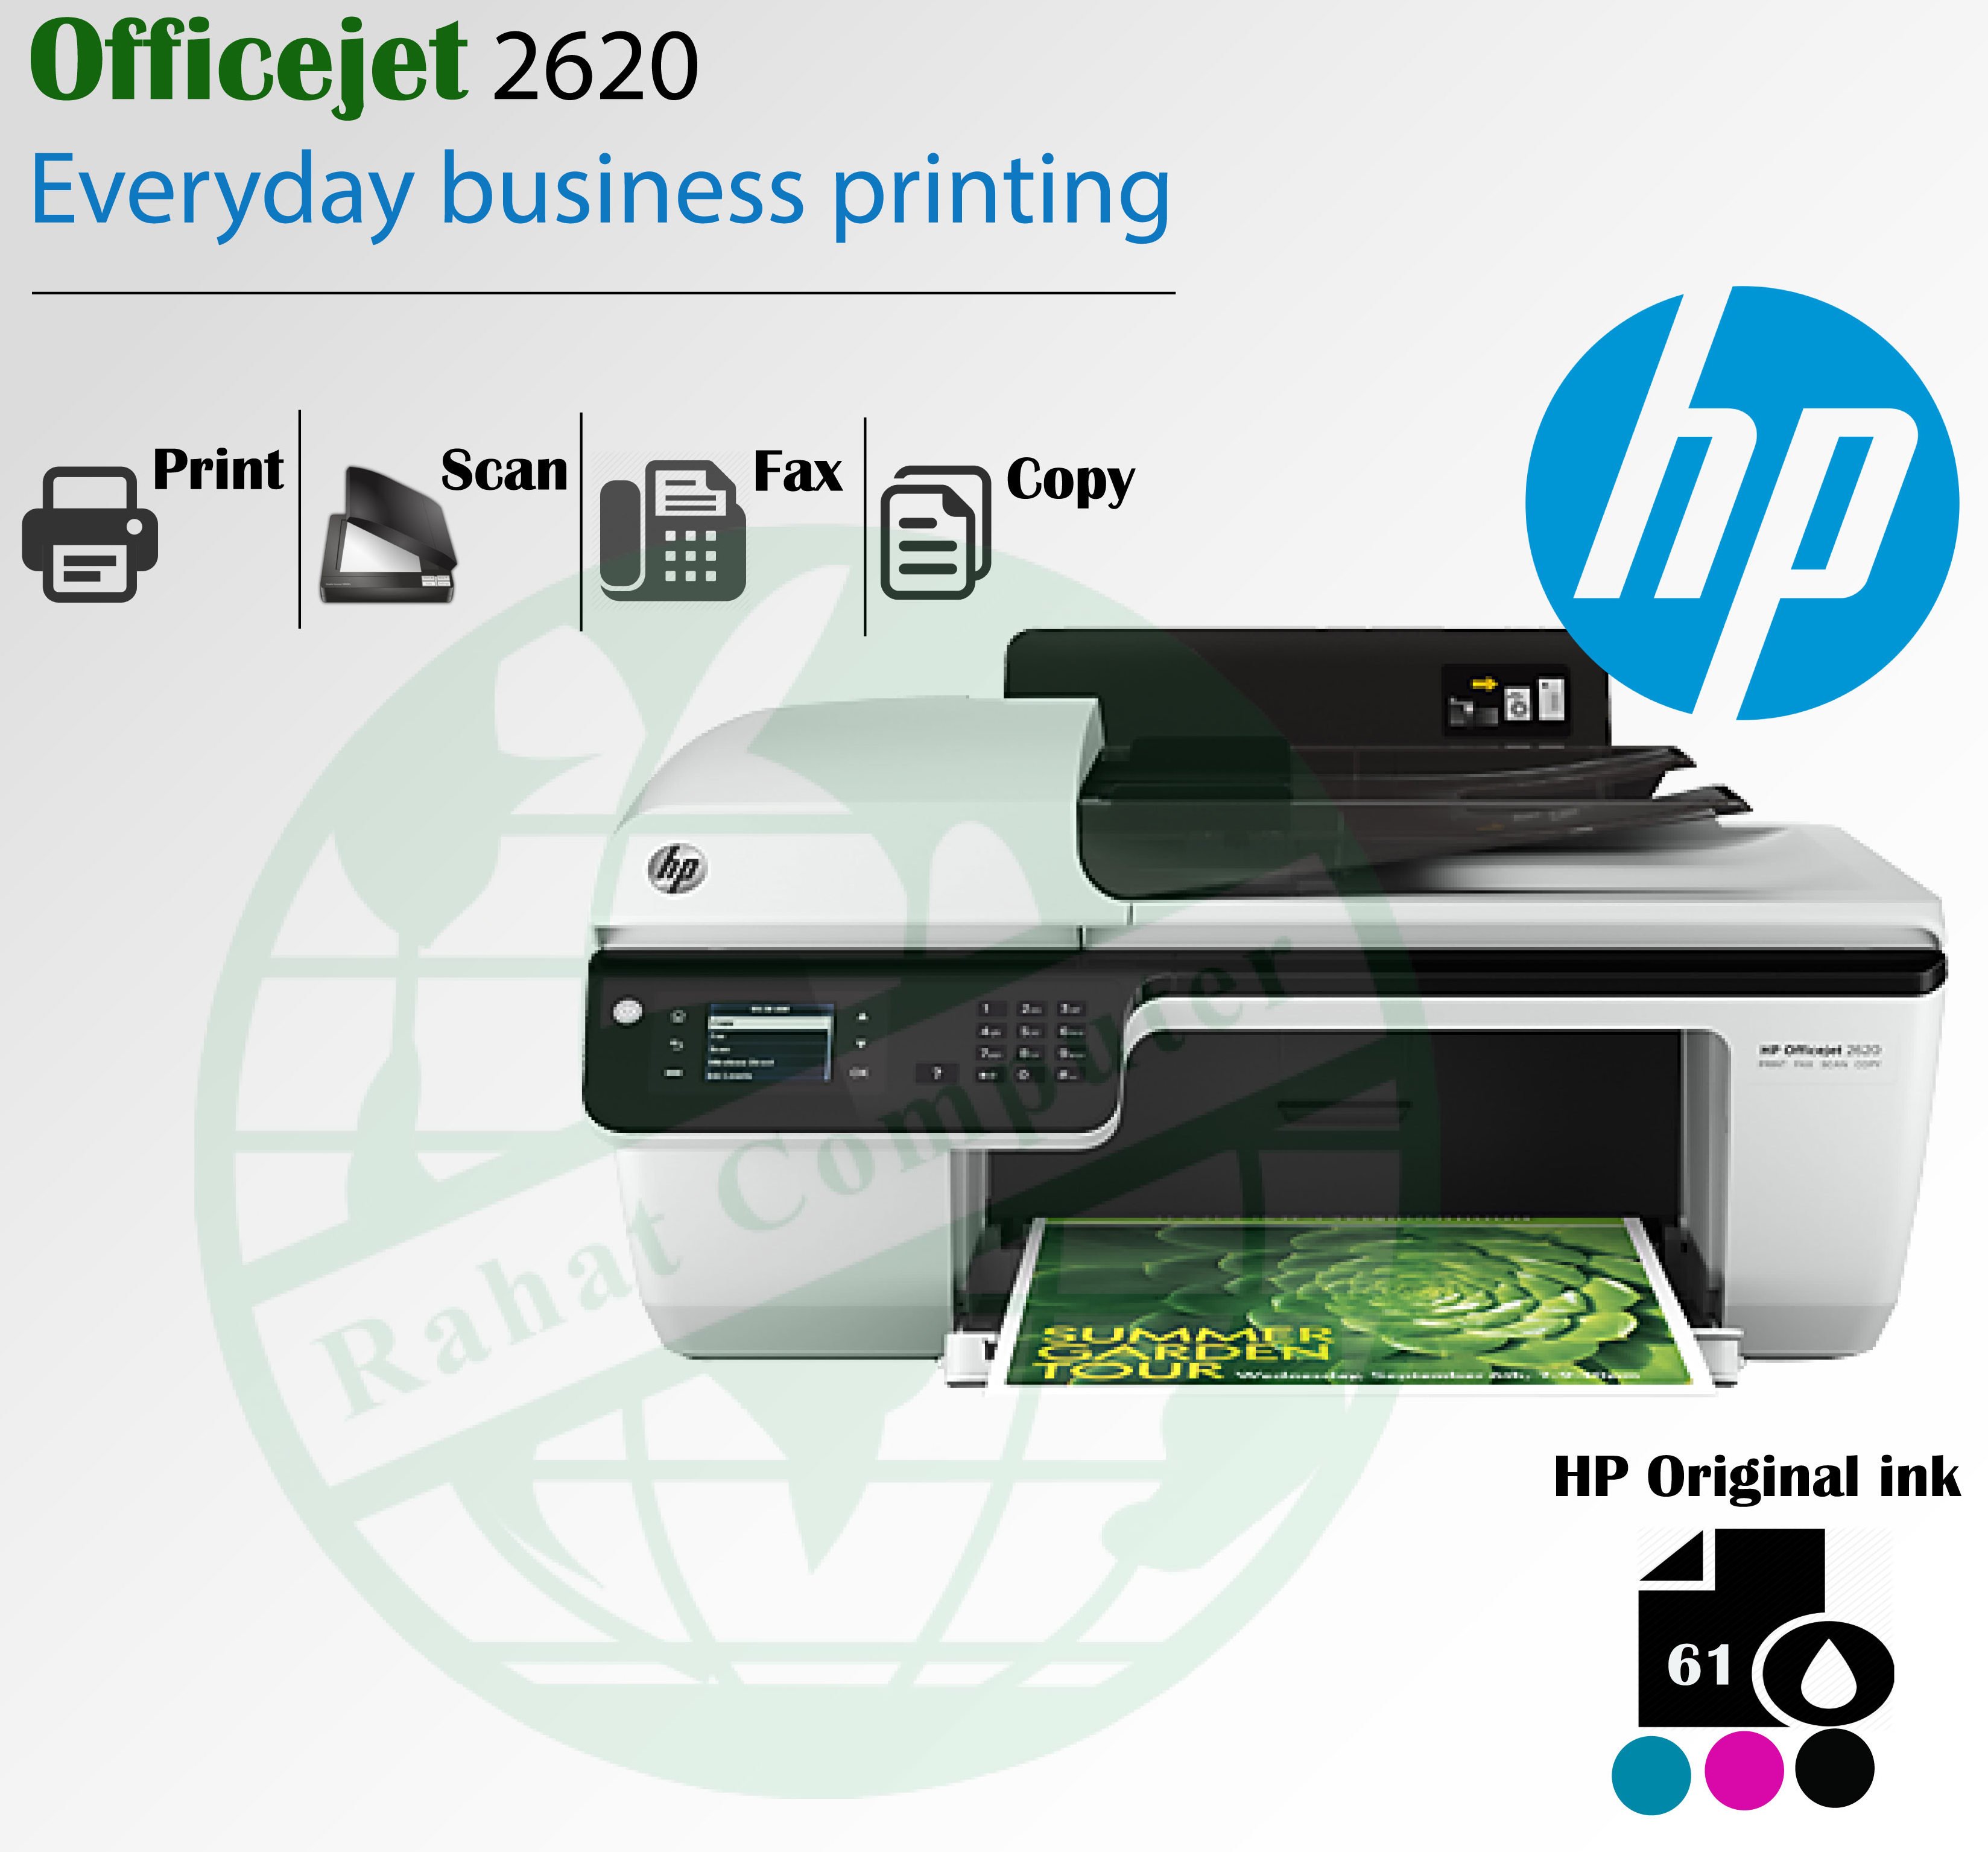 Rahat Computer Services on X: HP Officejet 2620 All in One Printer  Whatsapp On +968 90546601,+968-99437237 #hp #printers #ink #ruwi #muscat  #oman  / X